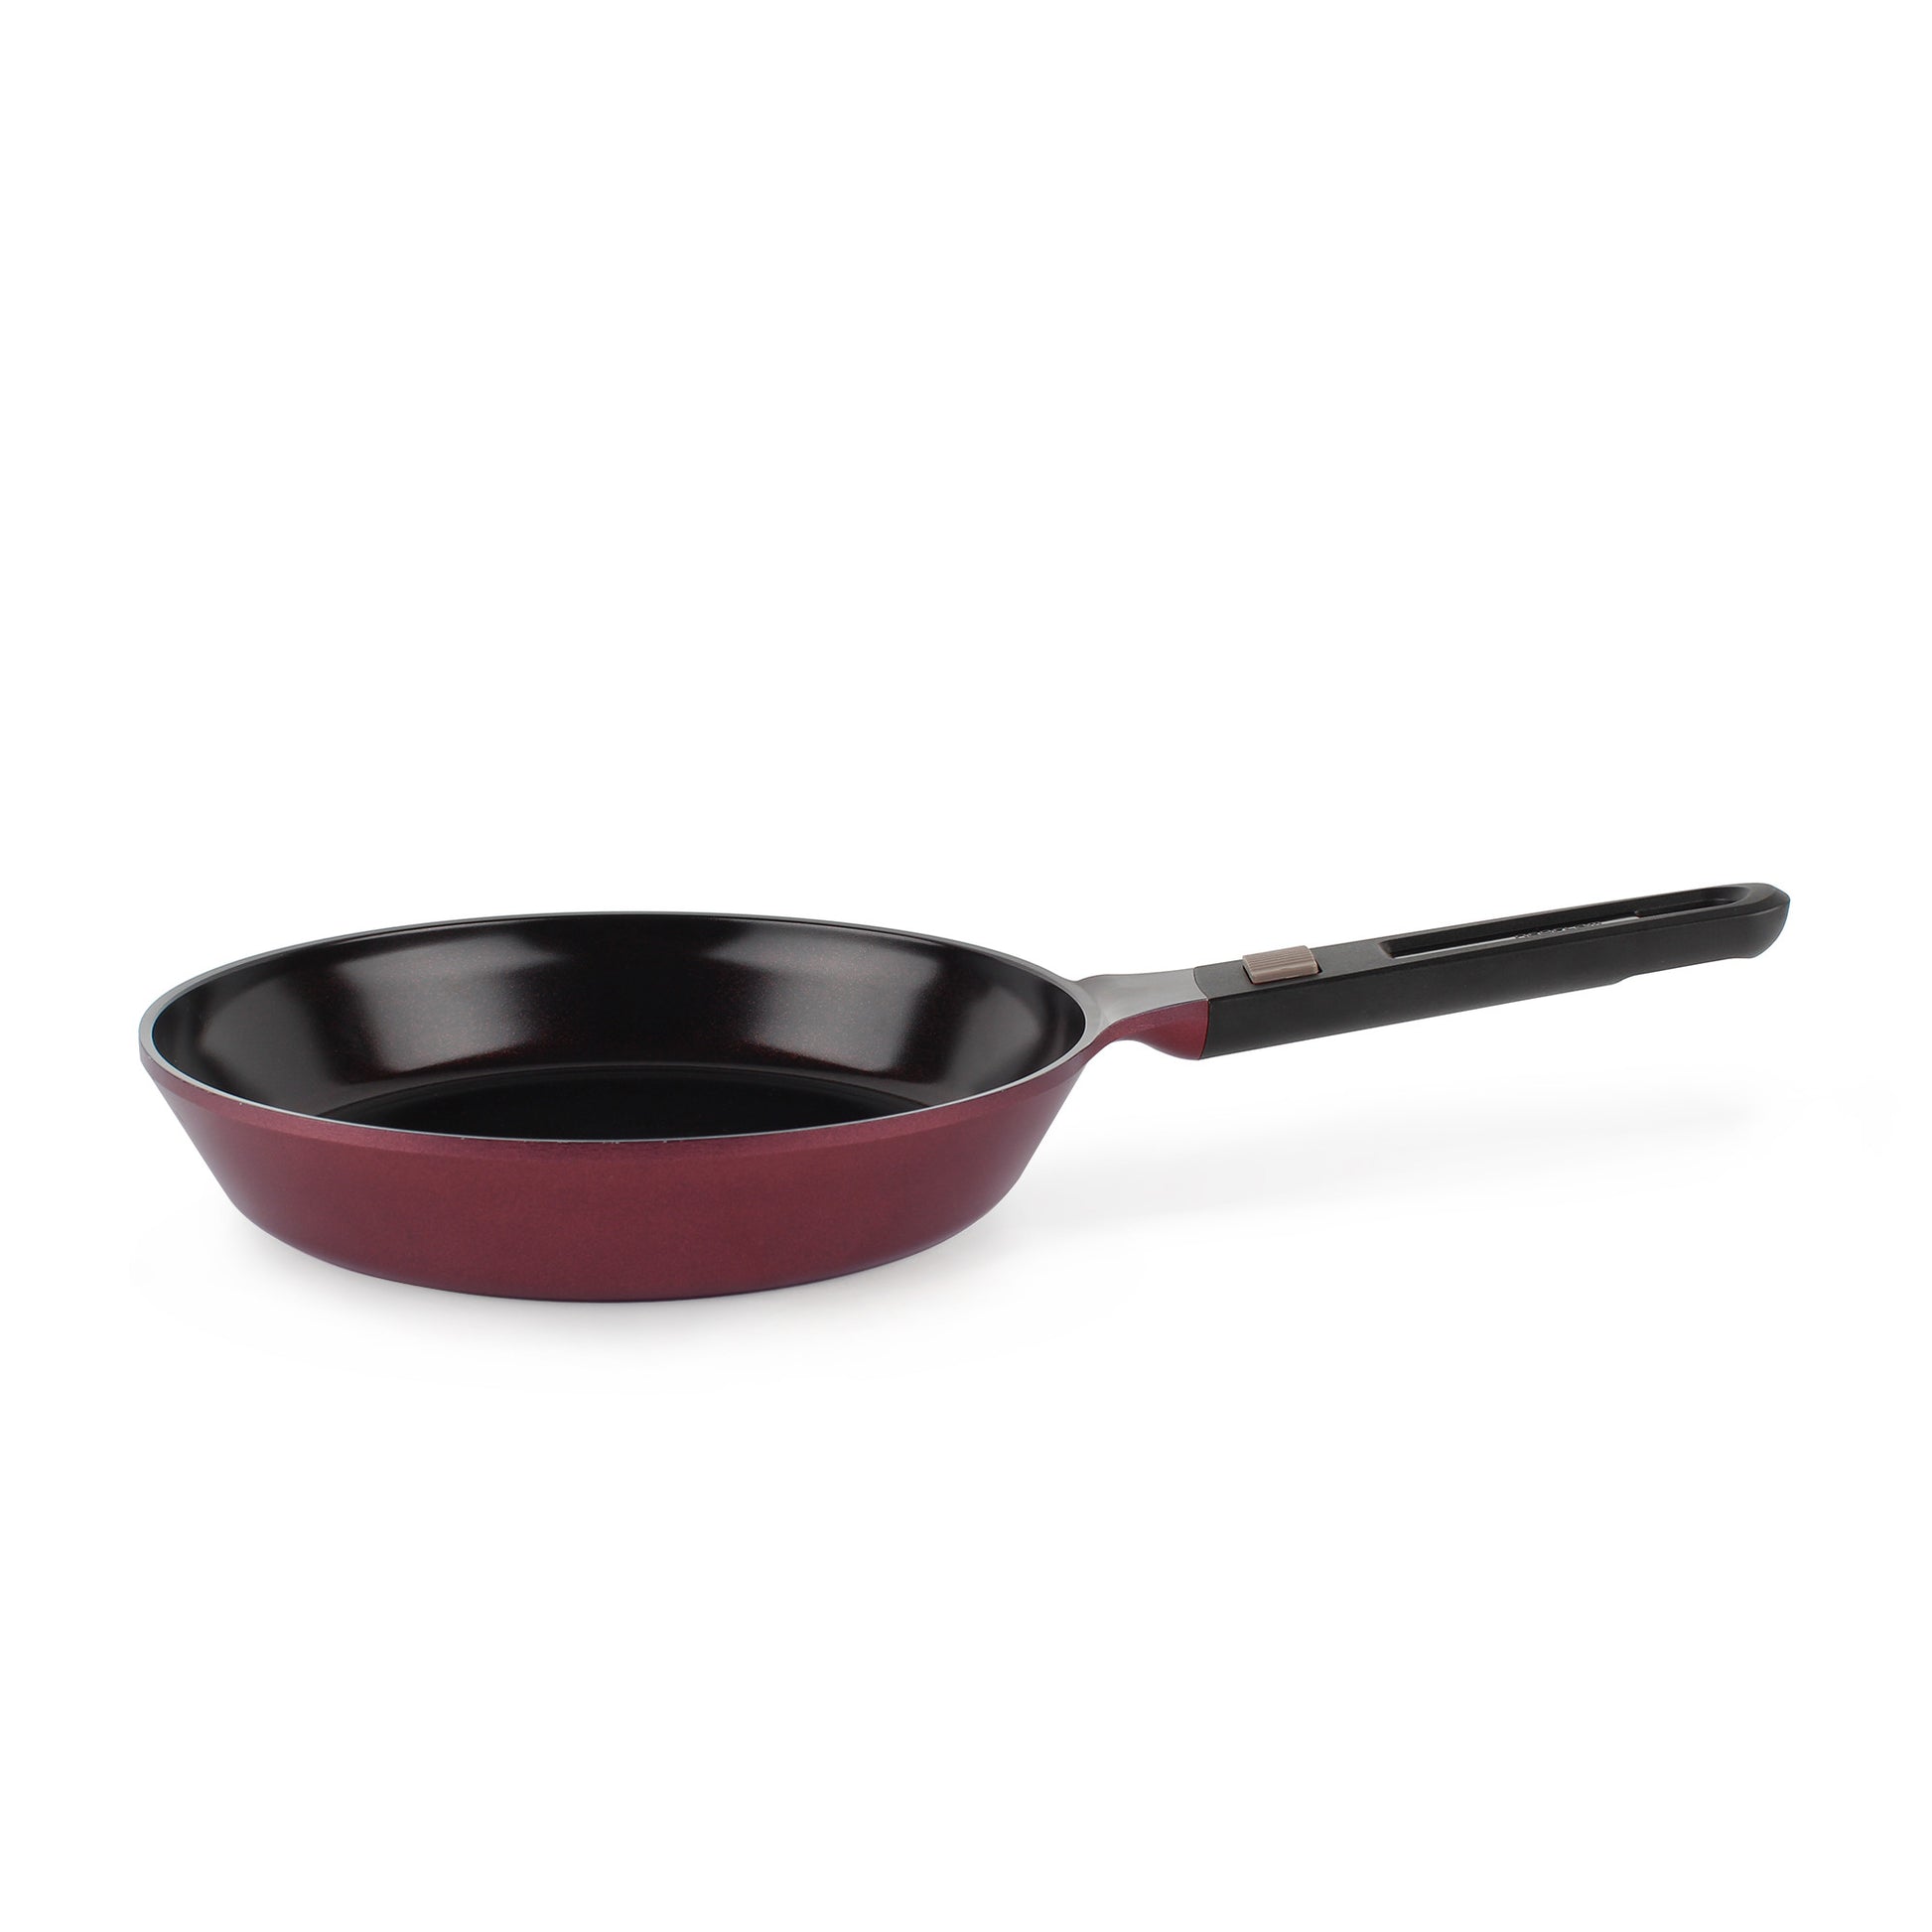 Neoflam MyPan 11-inch Ceramic Nonstick Frying Pan with Detachable